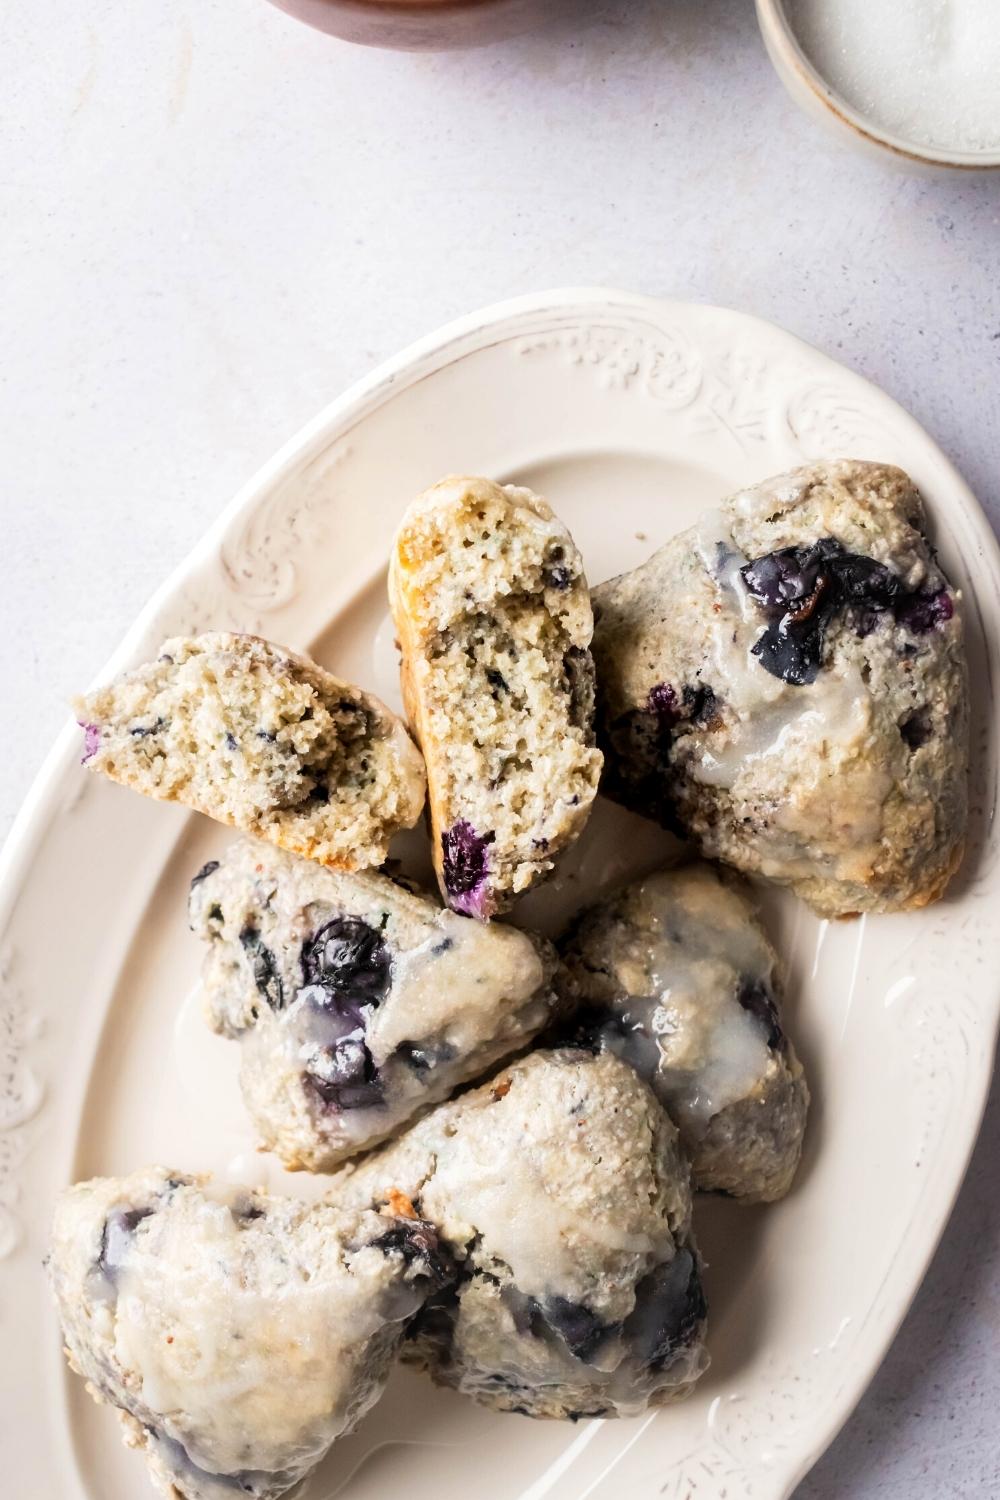 Part of a white plate with a couple of blueberry scones on it with one stone broken in half with the inside facing up.